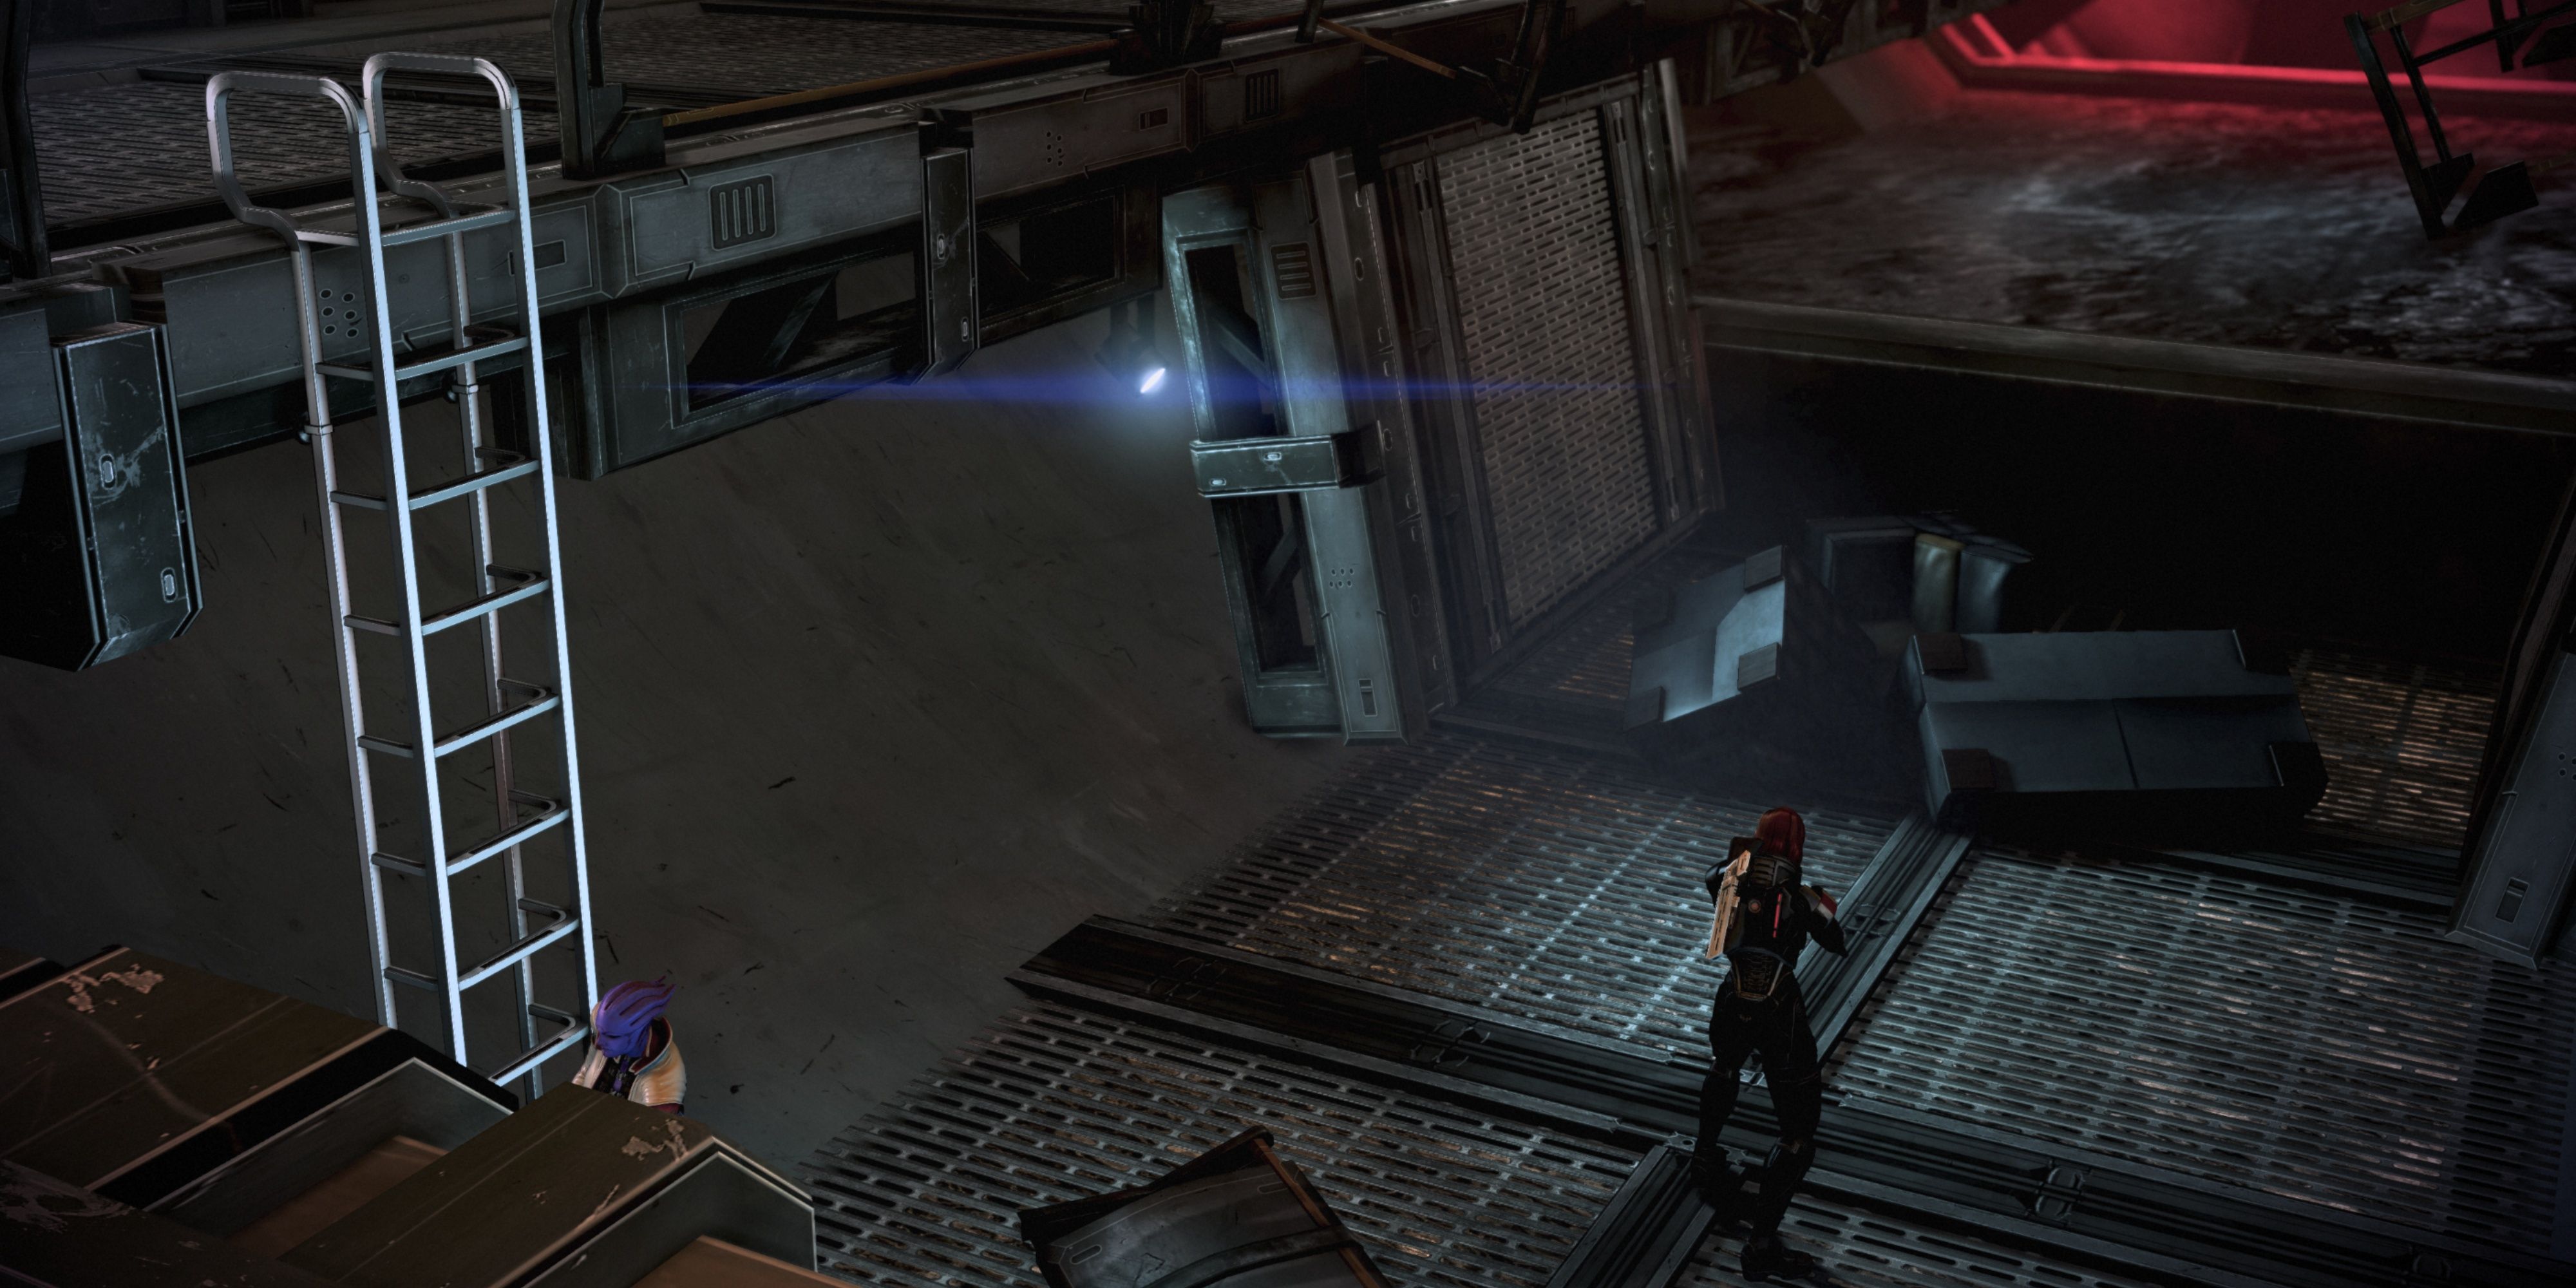 mass effect 3 couch location